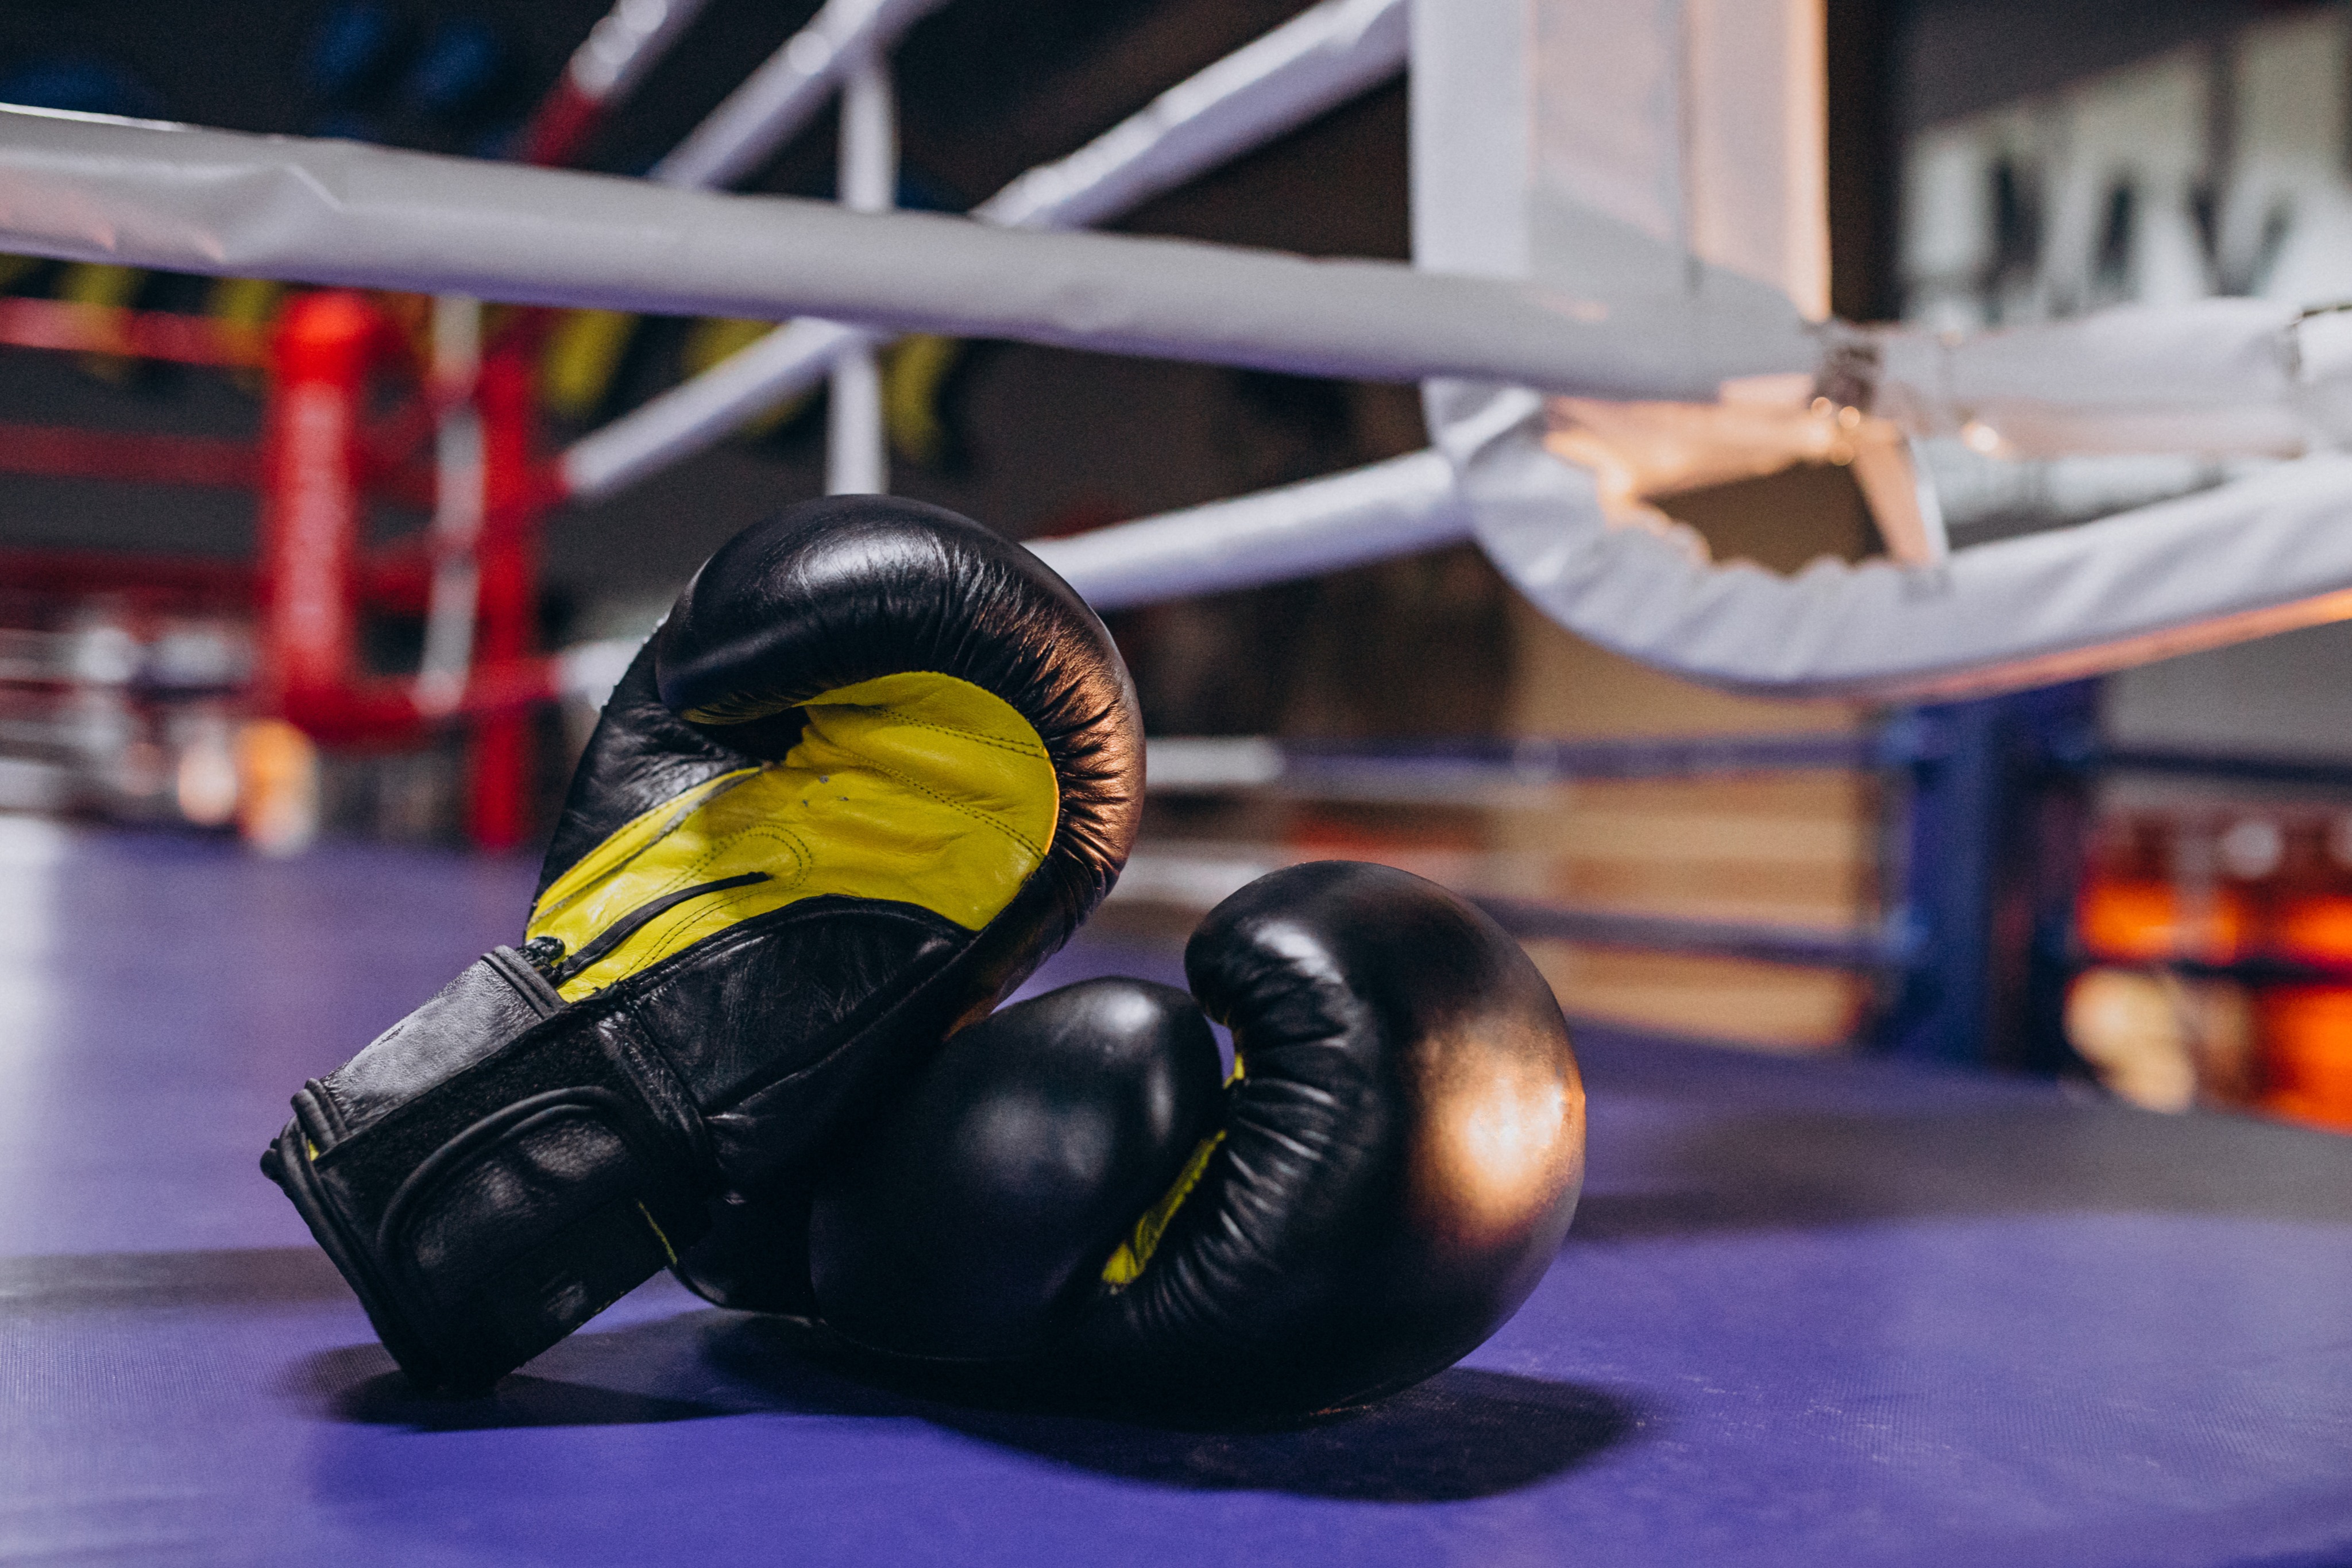 England Boxing step into the ring with Sport:80 to develop tech partnership that packs a punch